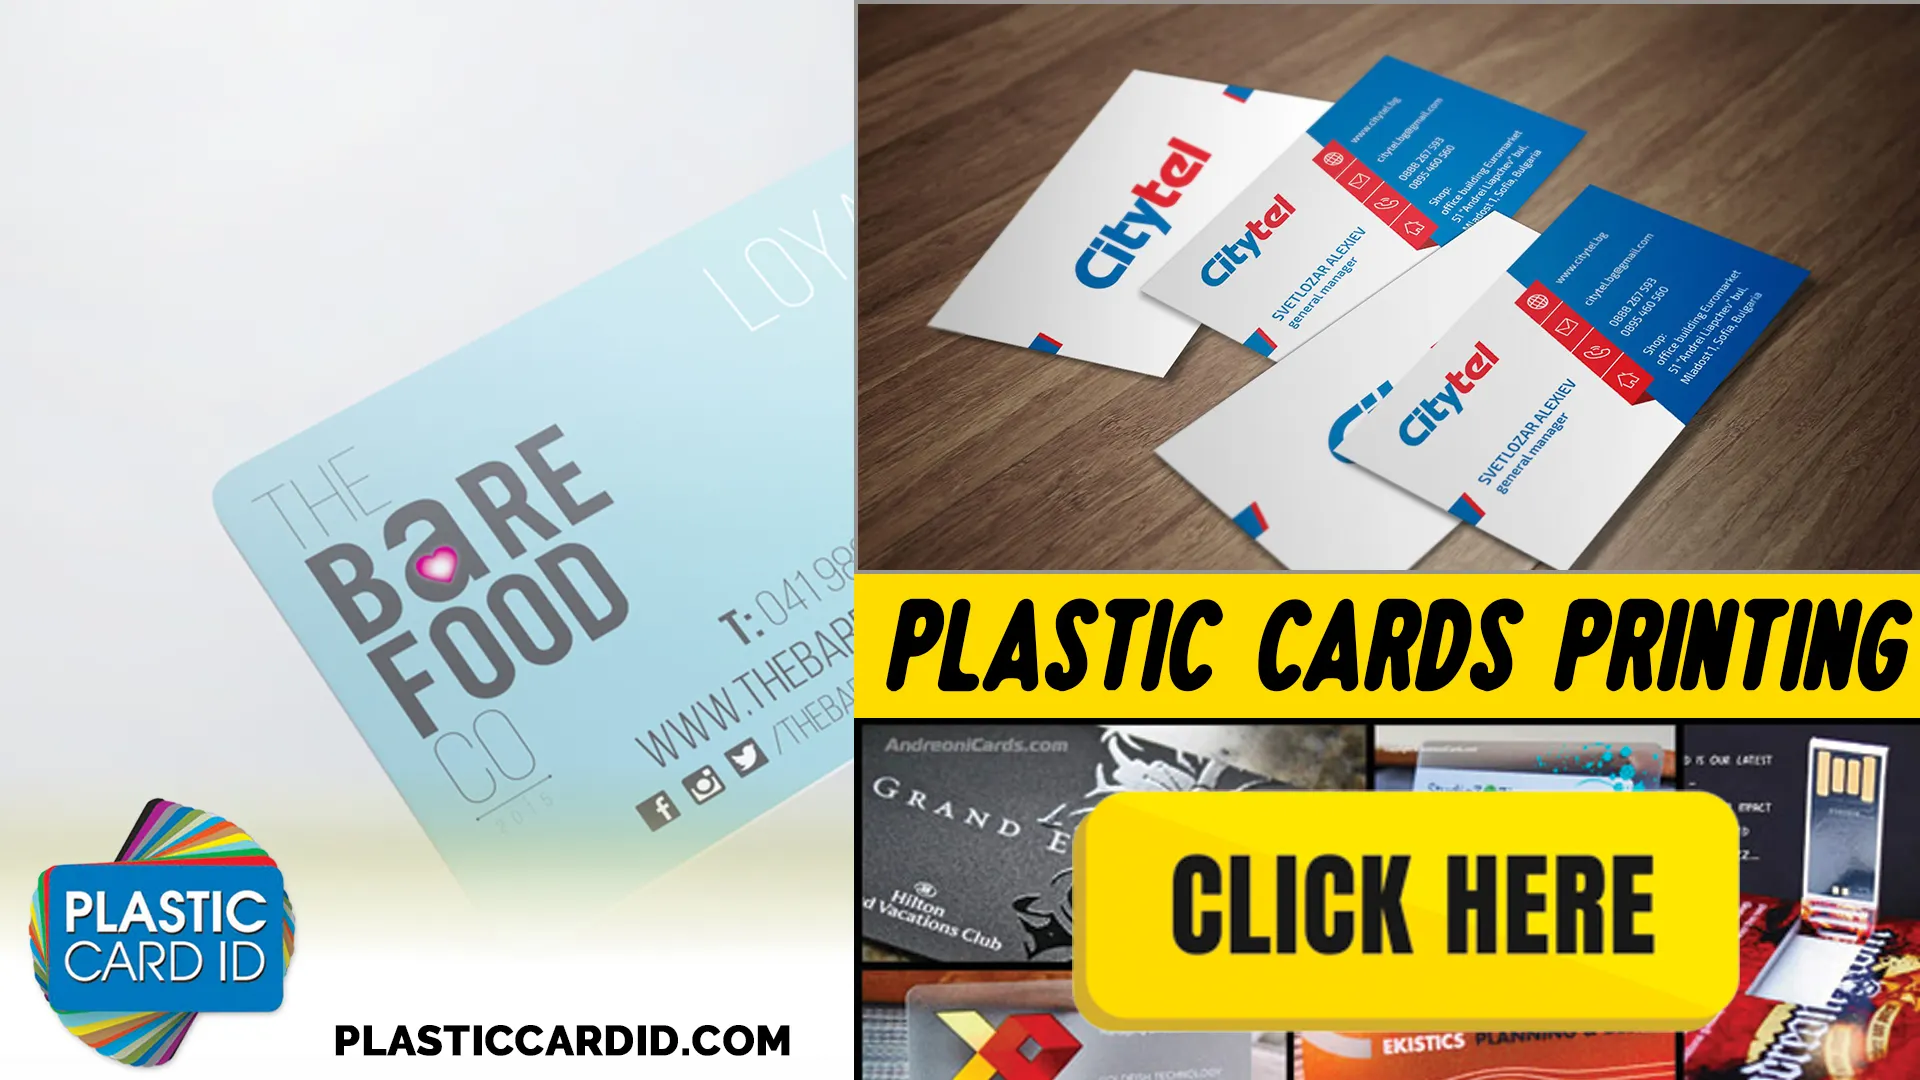 Customizing Card Solutions for Every Client